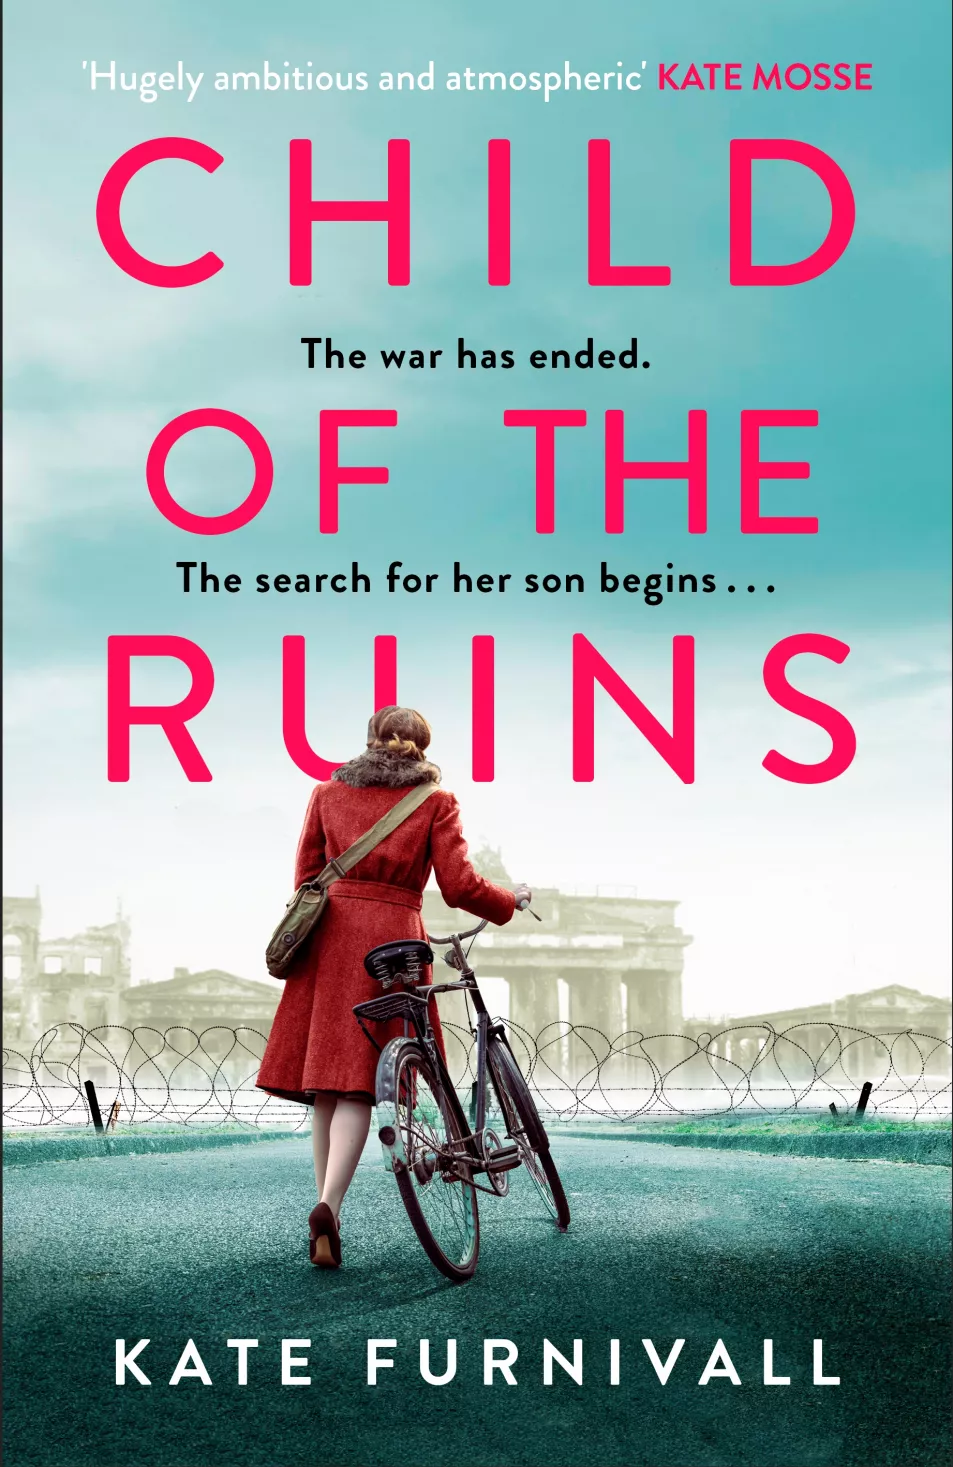 A Child Of The Ruins by Kate Furnivall is published in hardback by Hodder & Stoughton